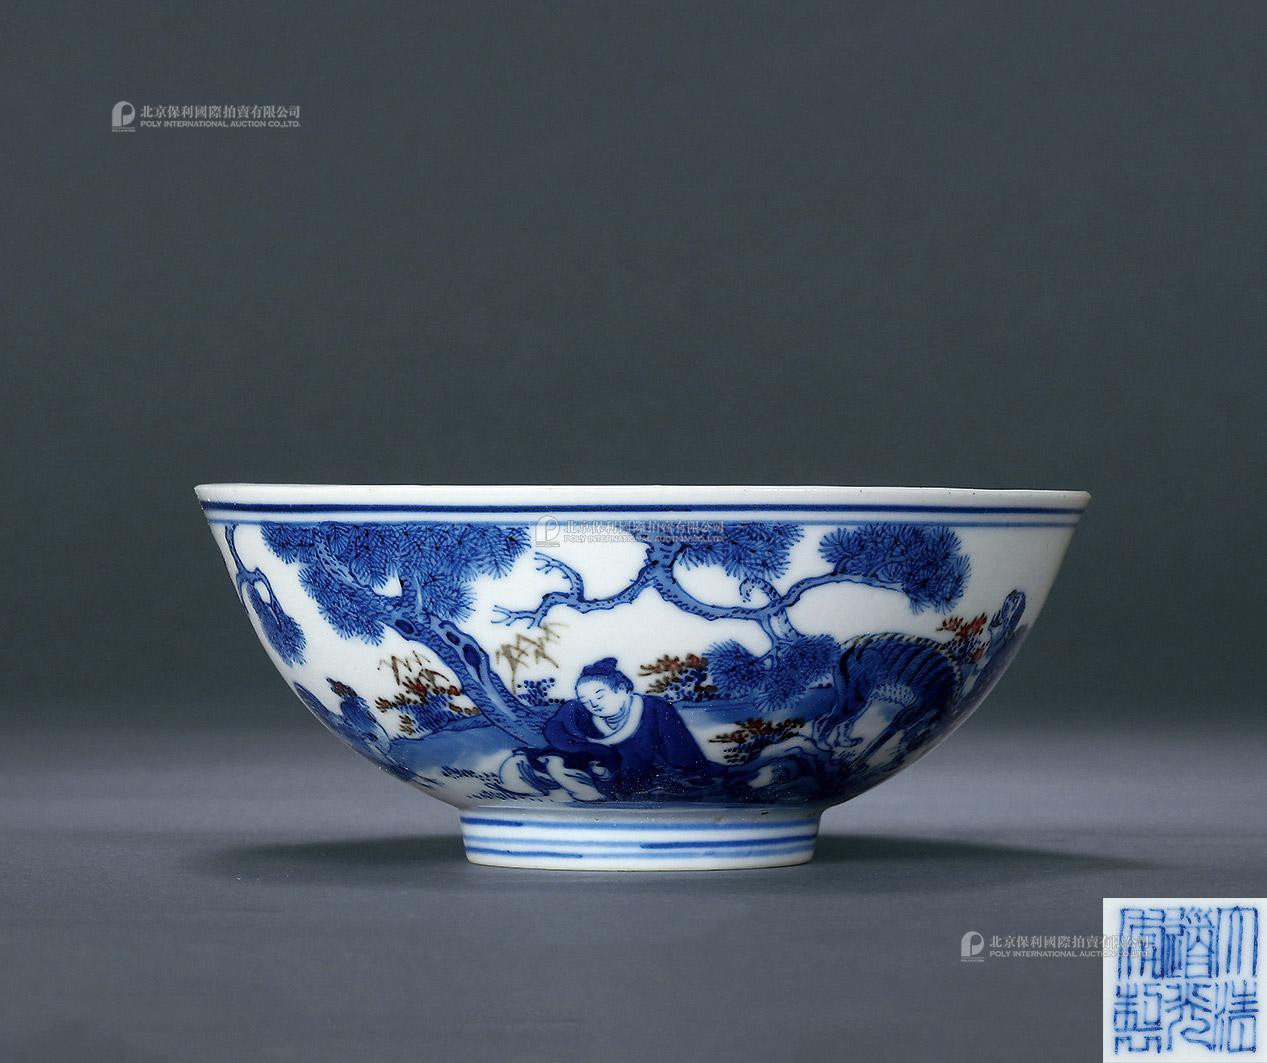 A BLUE AND WHITE BOWL WITH POETIC PROSE DESIGN